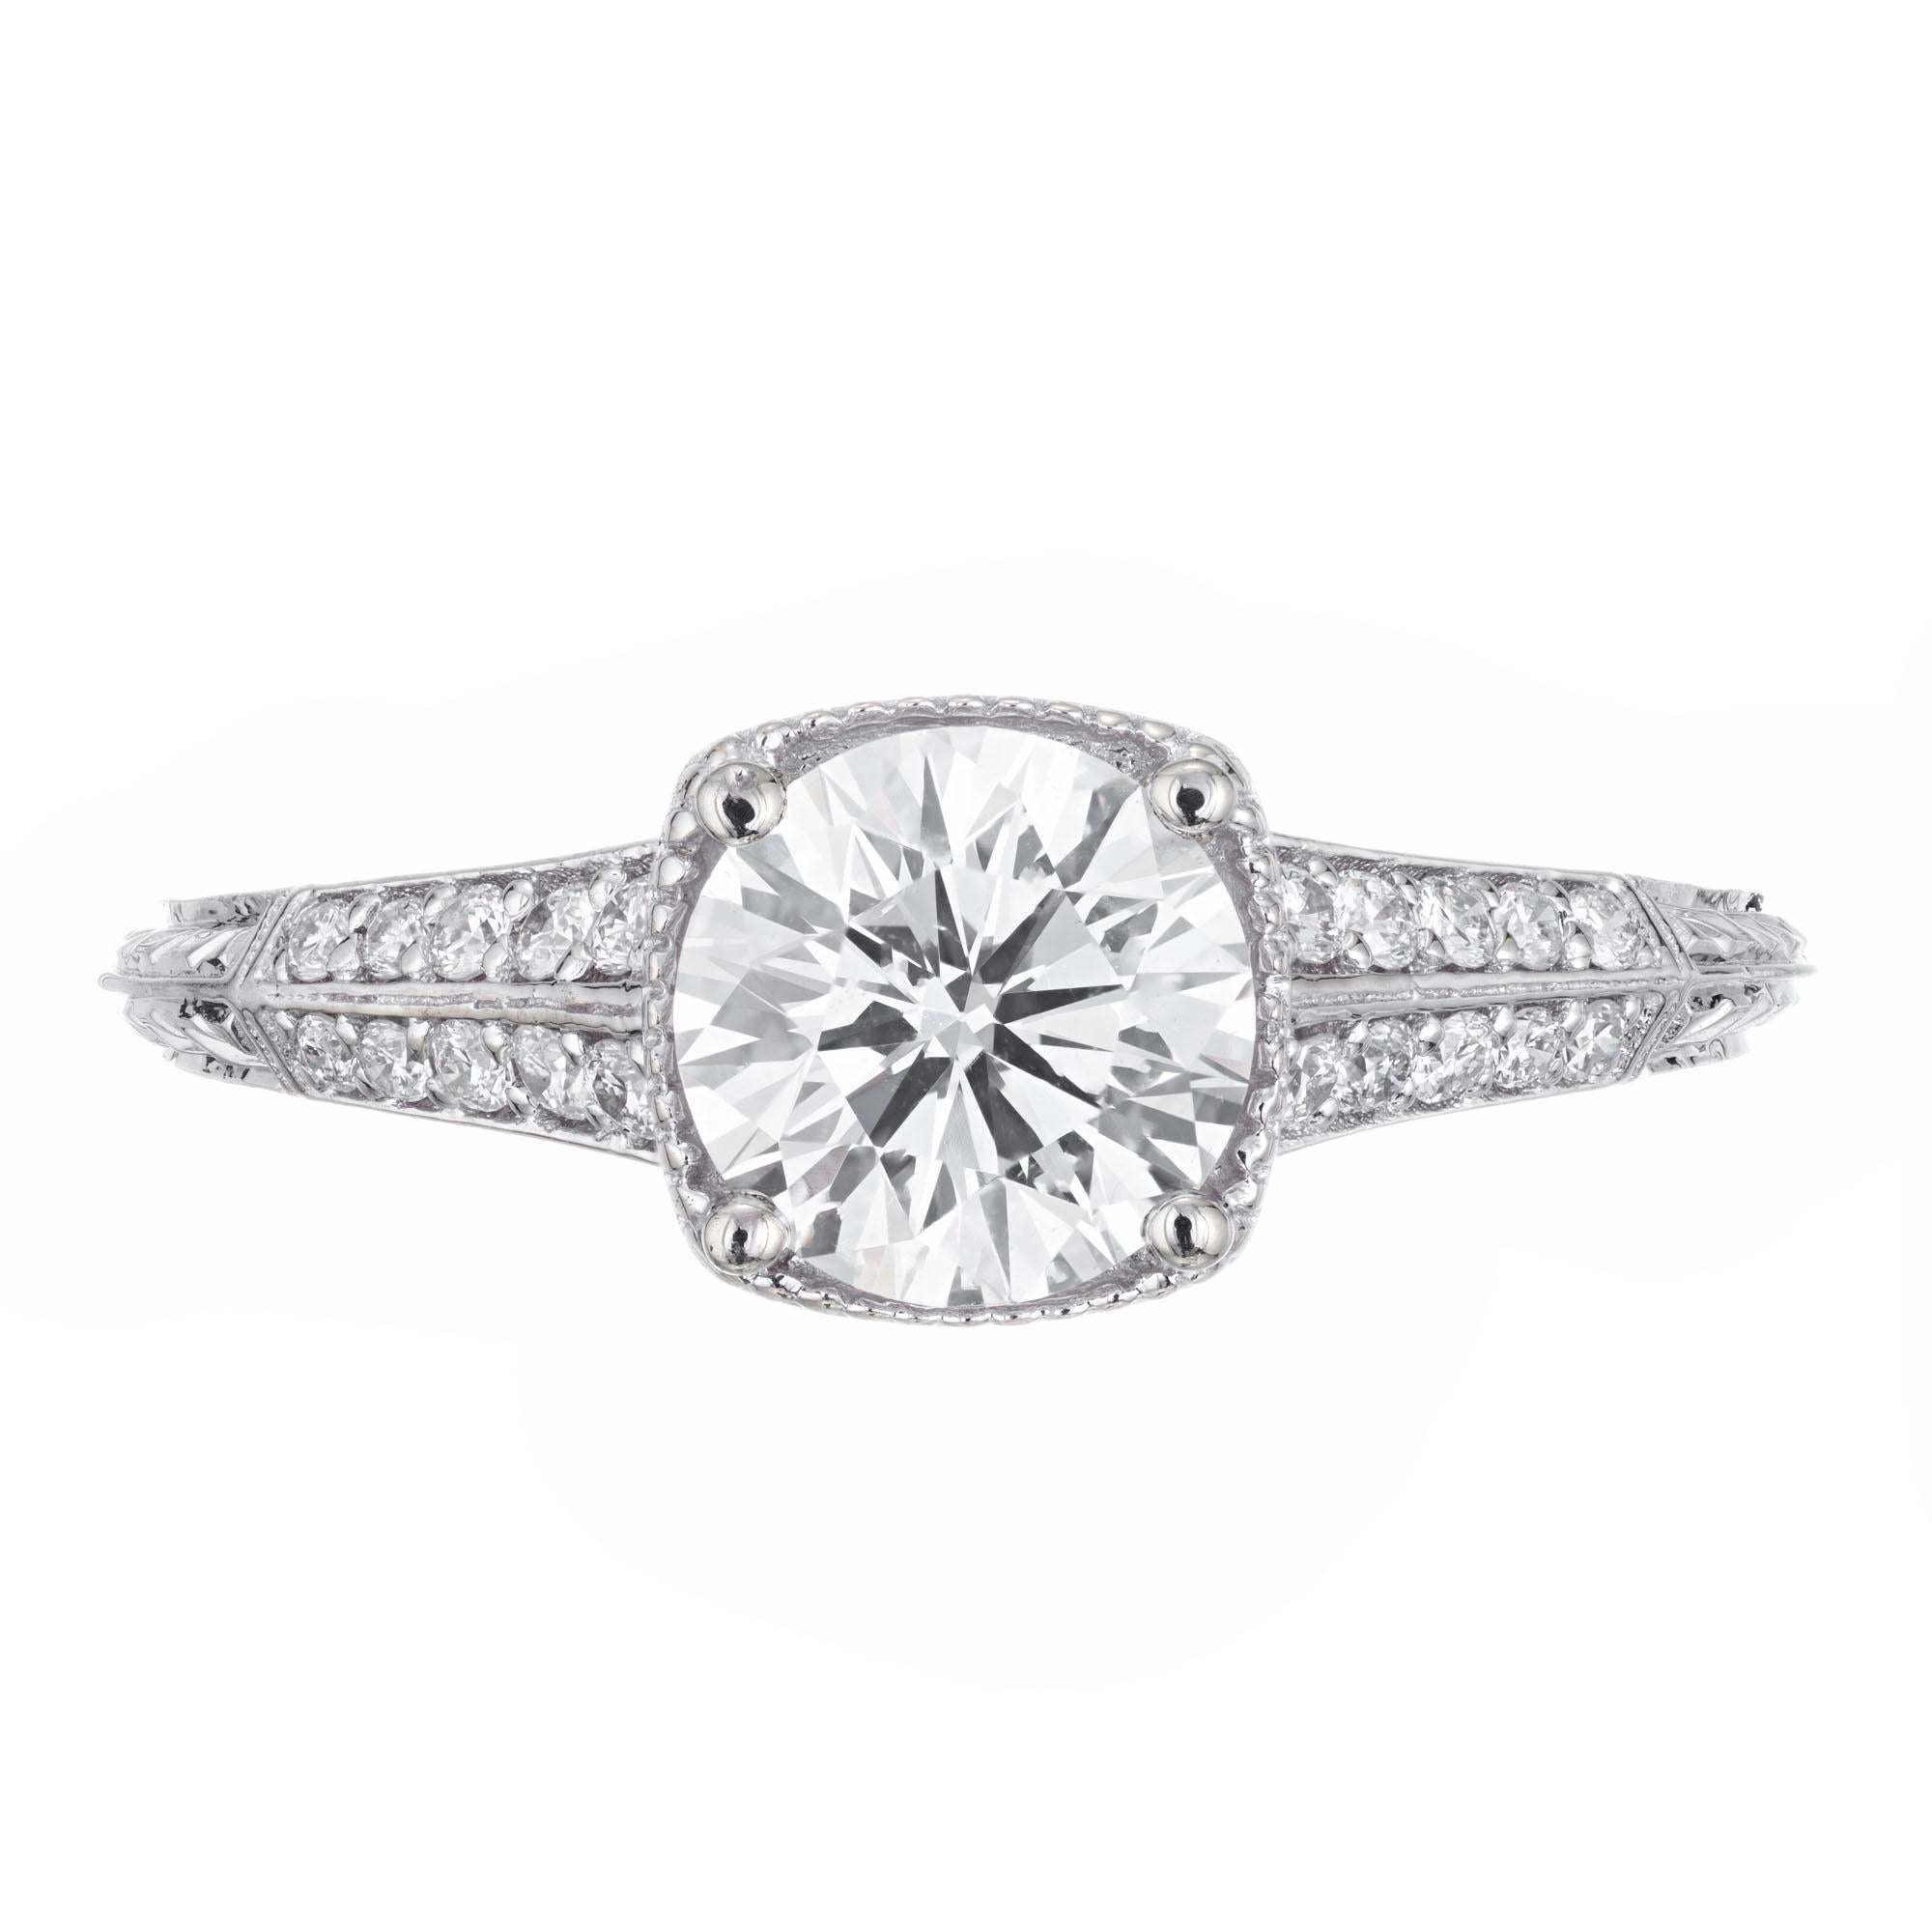 Ideal Brilliant cut diamond engagement ring. GIA certified center stone, set in a 18k white gold setting with 20 round accent diamonds. 

1 round diamond, approx. total weight 1.10cts, G, SI1, GIA certificate #2175779159
20 round diamonds, approx.